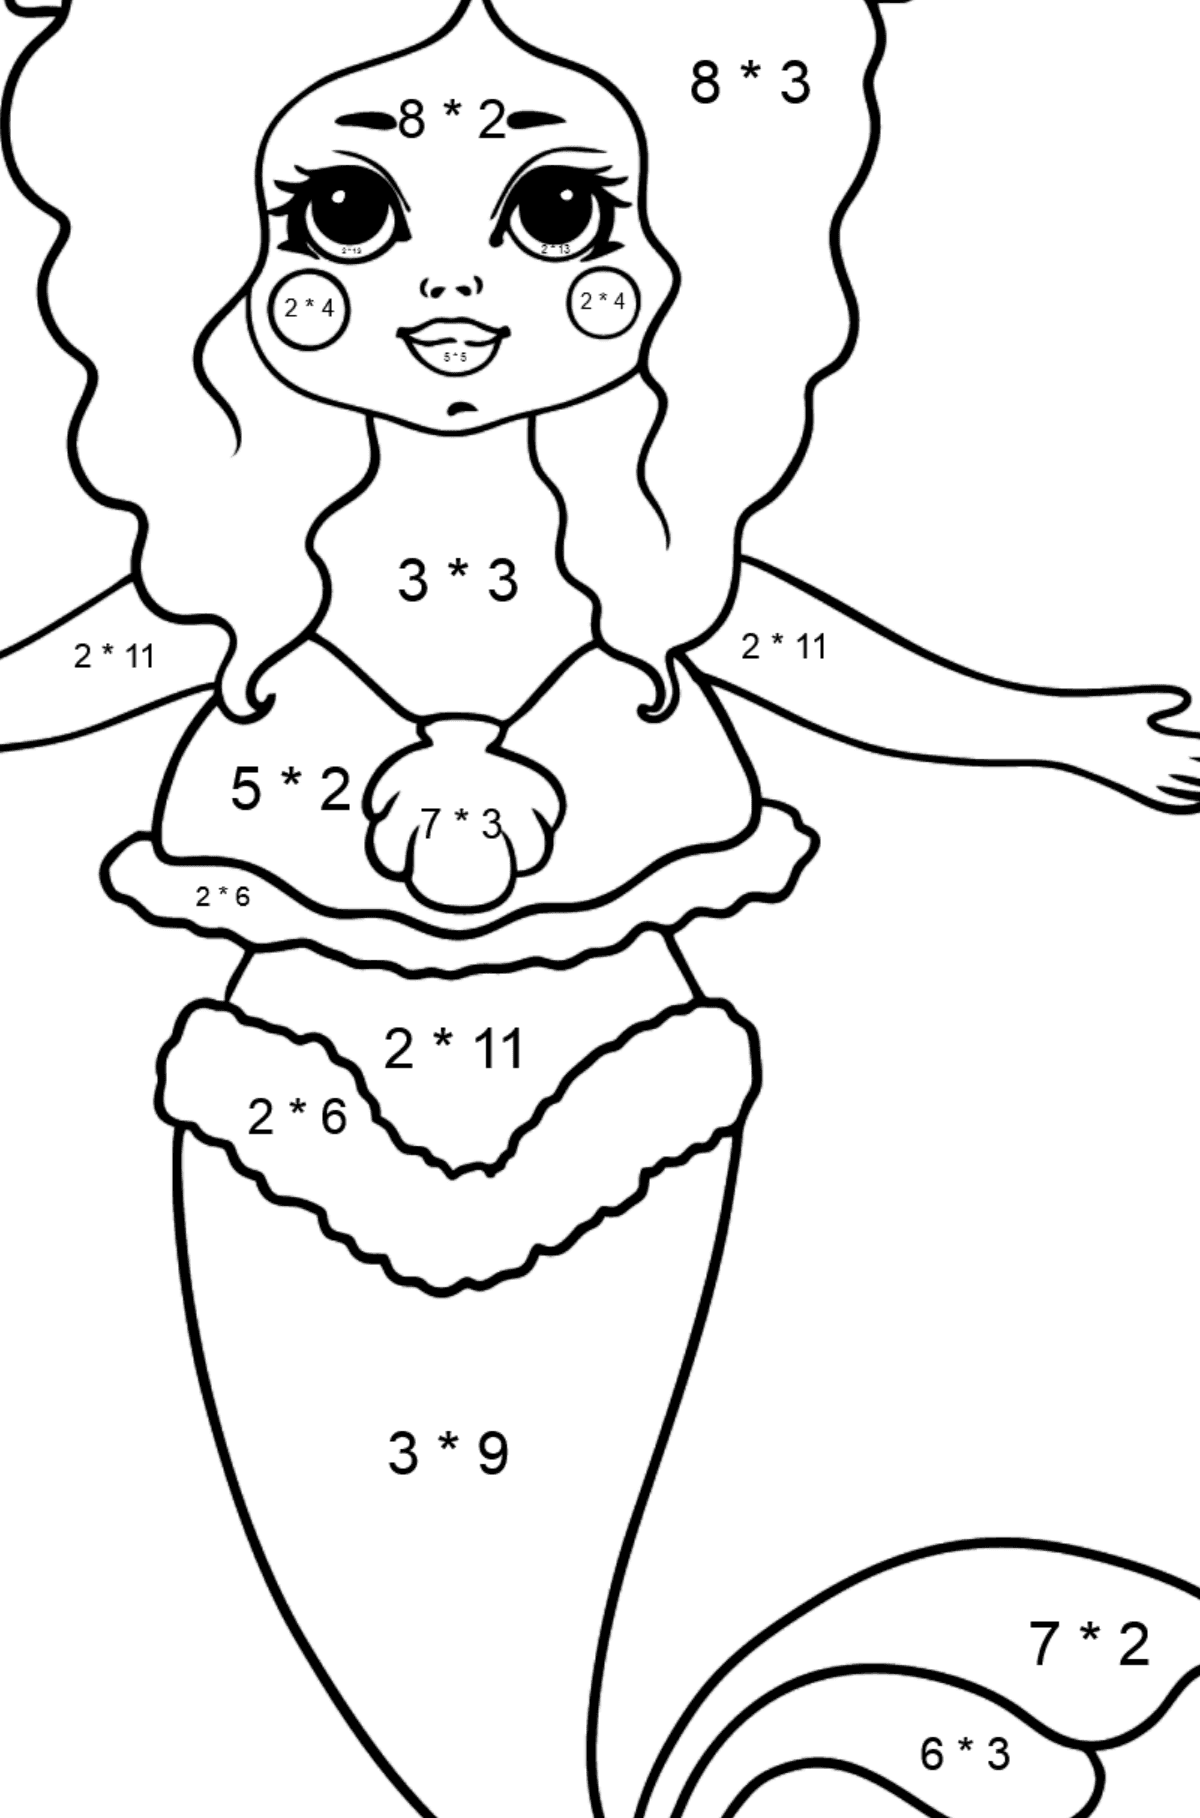 Mermaid with Yellow Tail coloring page - Math Coloring - Multiplication for Kids